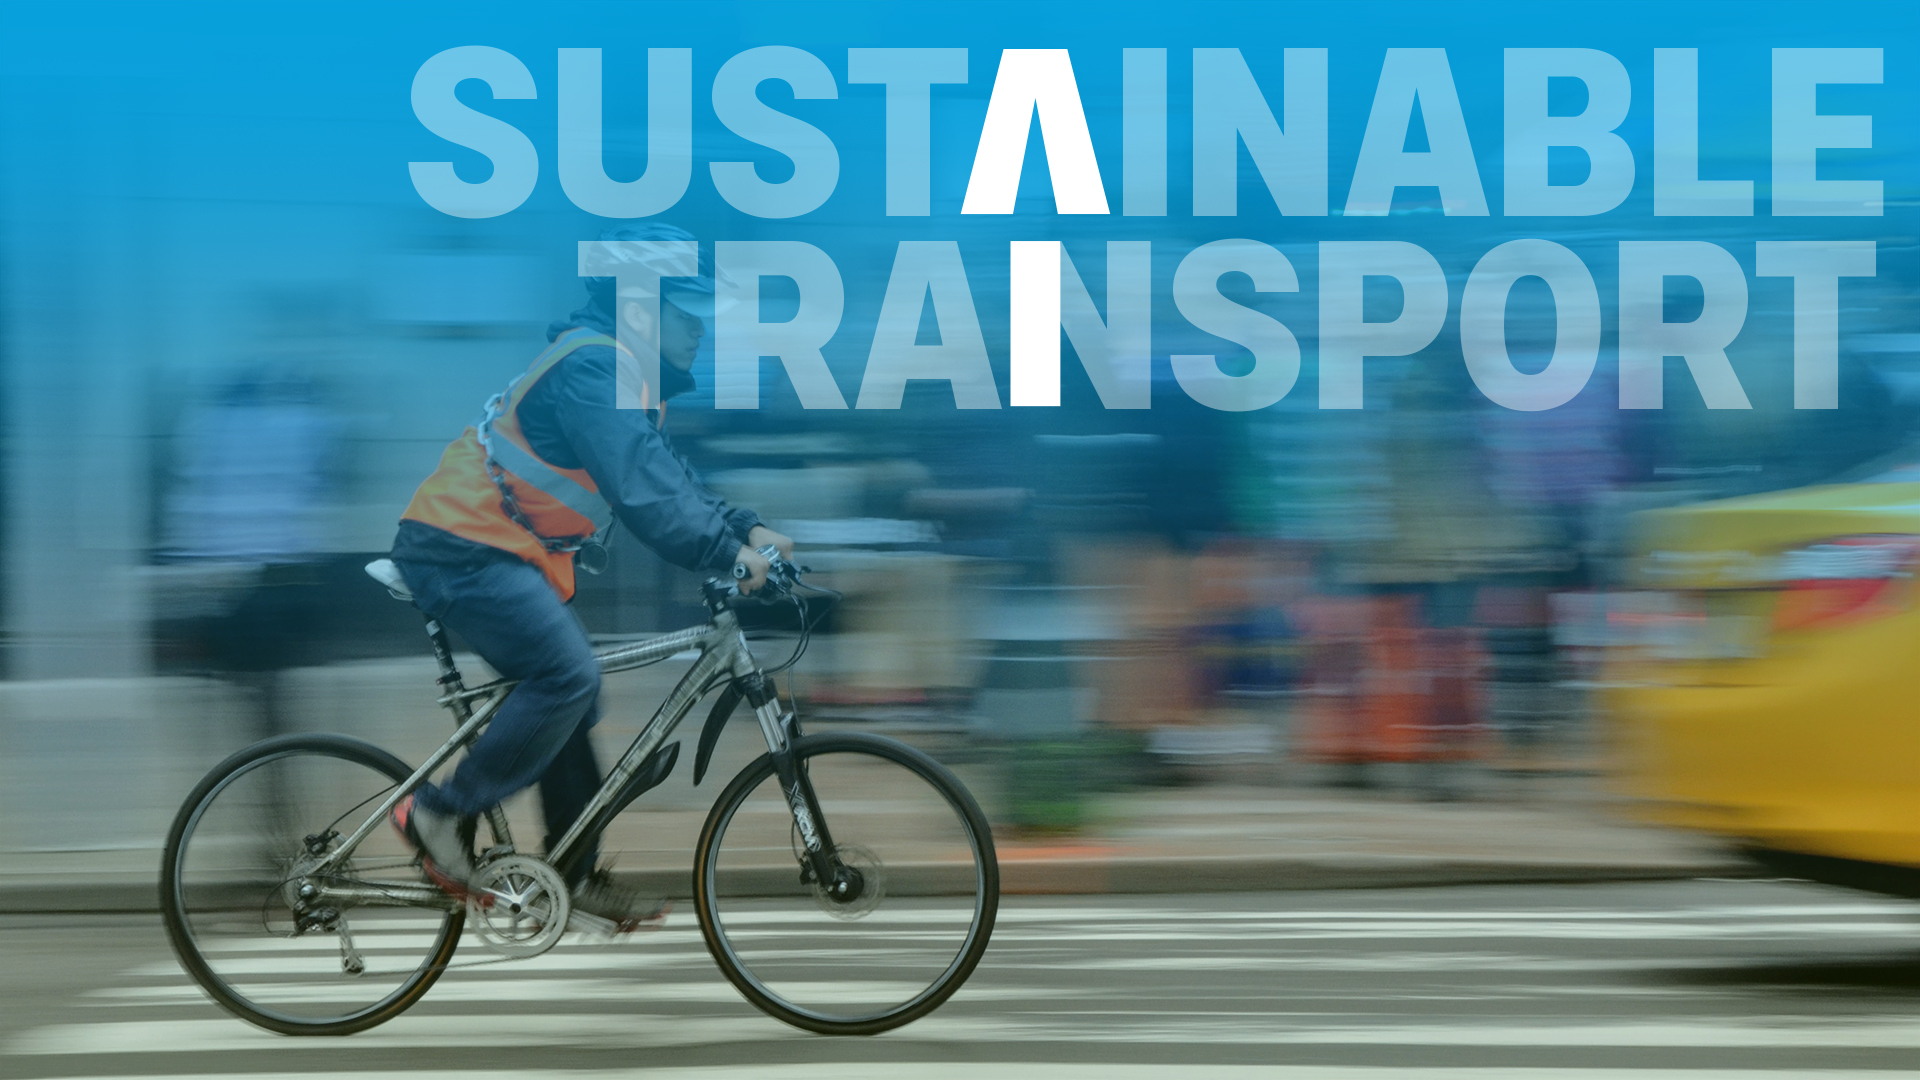 Image of cyclist and yellow taxi portraying sustainable transport